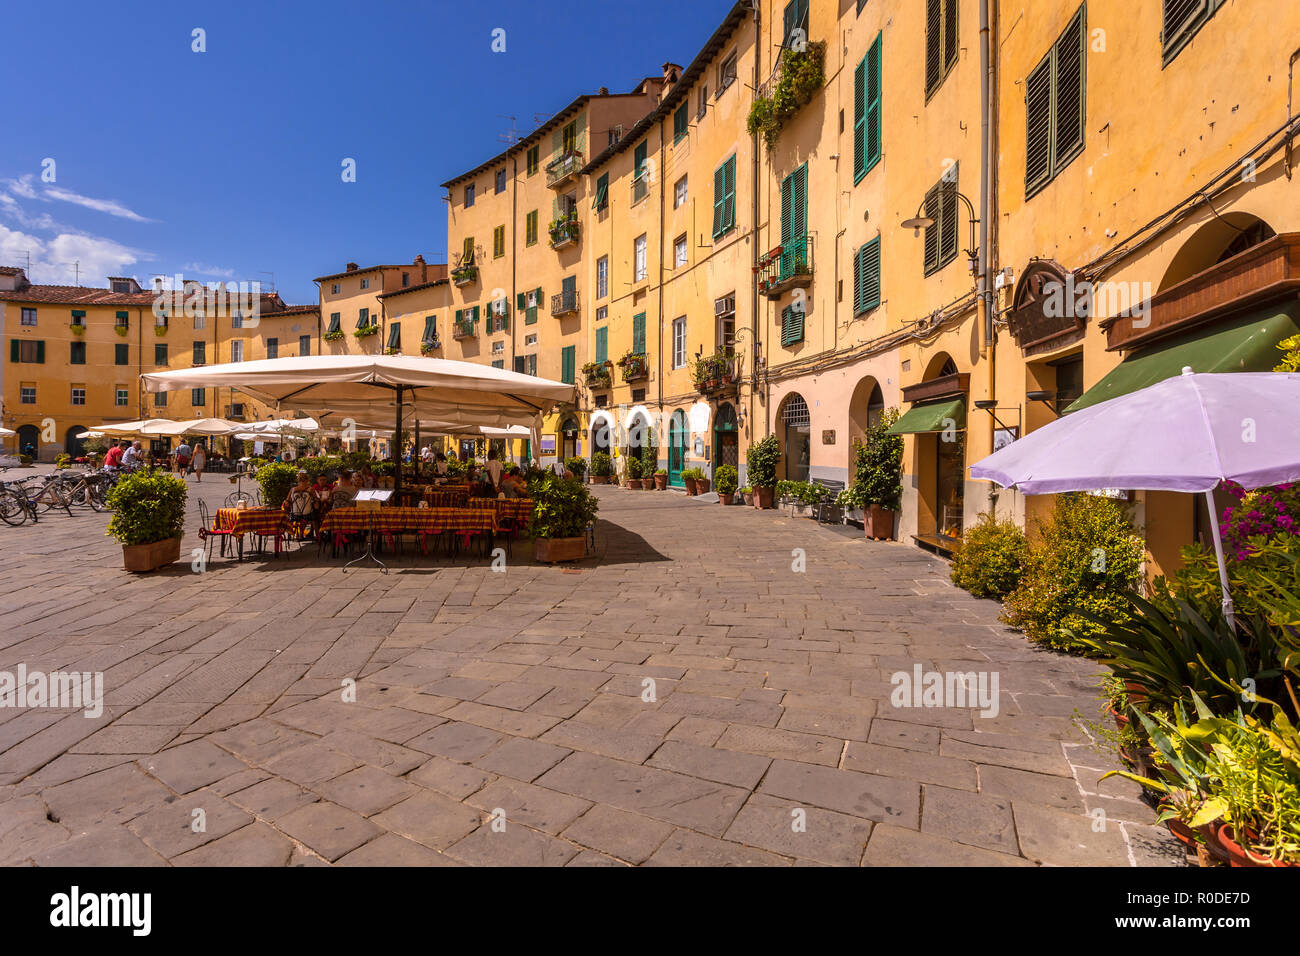 The touristic Oval City Square on a Sunny Day in Lucca, Tuscany, Italy Stock Photo